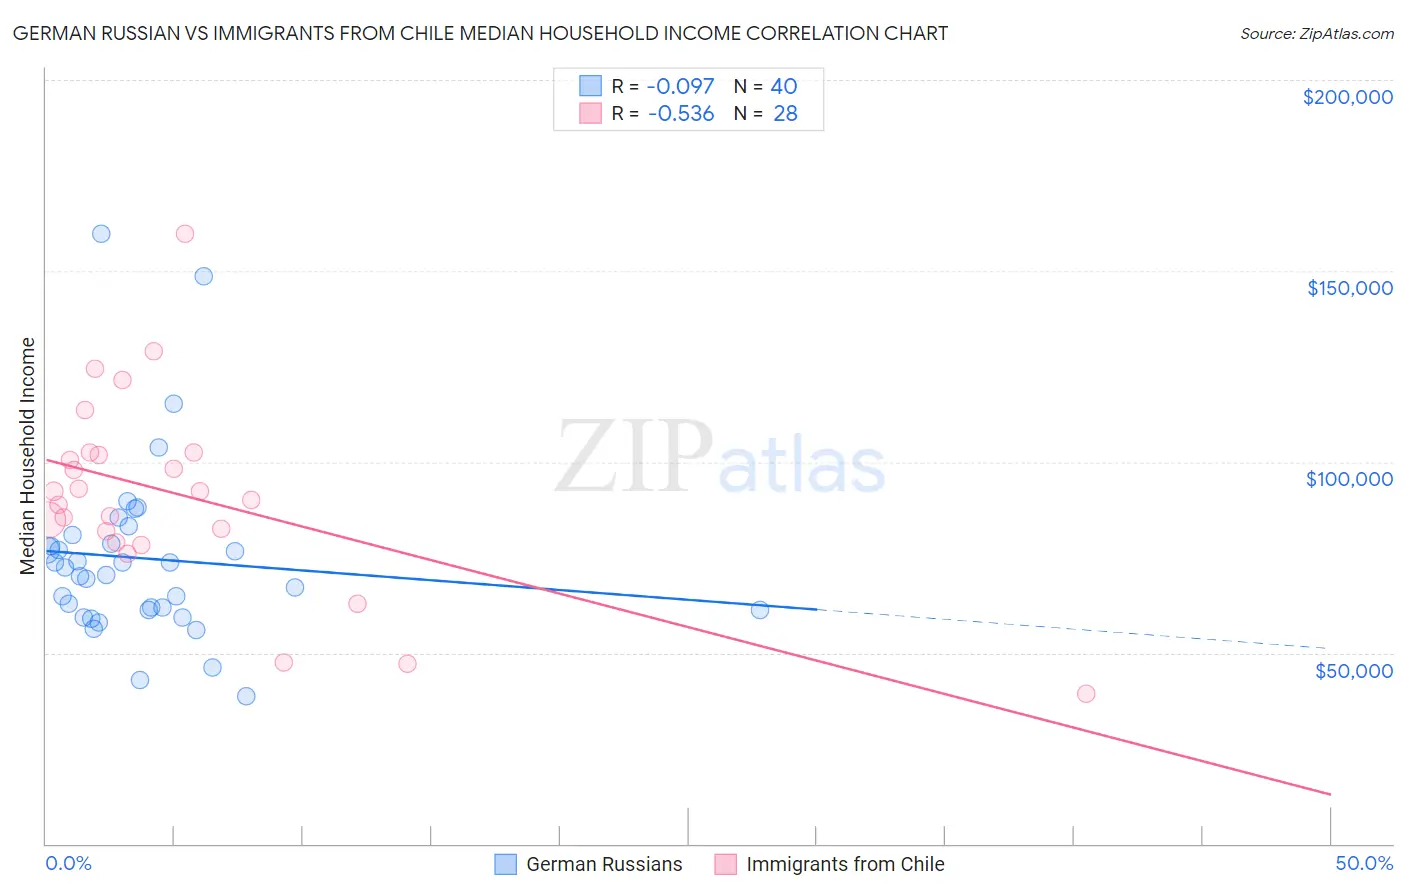 German Russian vs Immigrants from Chile Median Household Income